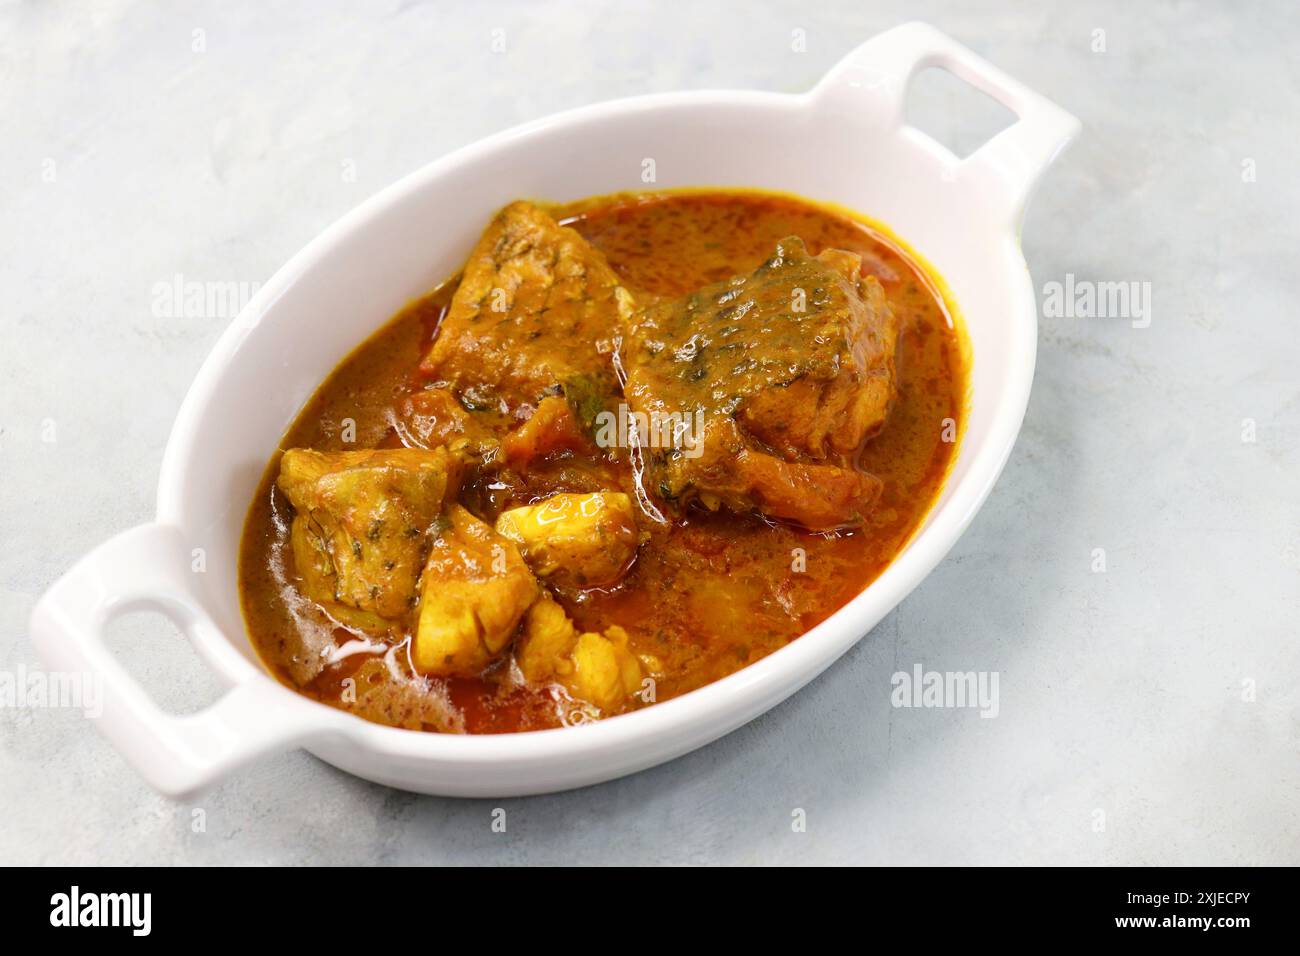 Indian Food. Homemade Spicy and tangy dadha or threadfin fish curry. Famous Maharashtrian red fish curry or kalvan is made with tomato and spices. Stock Photo